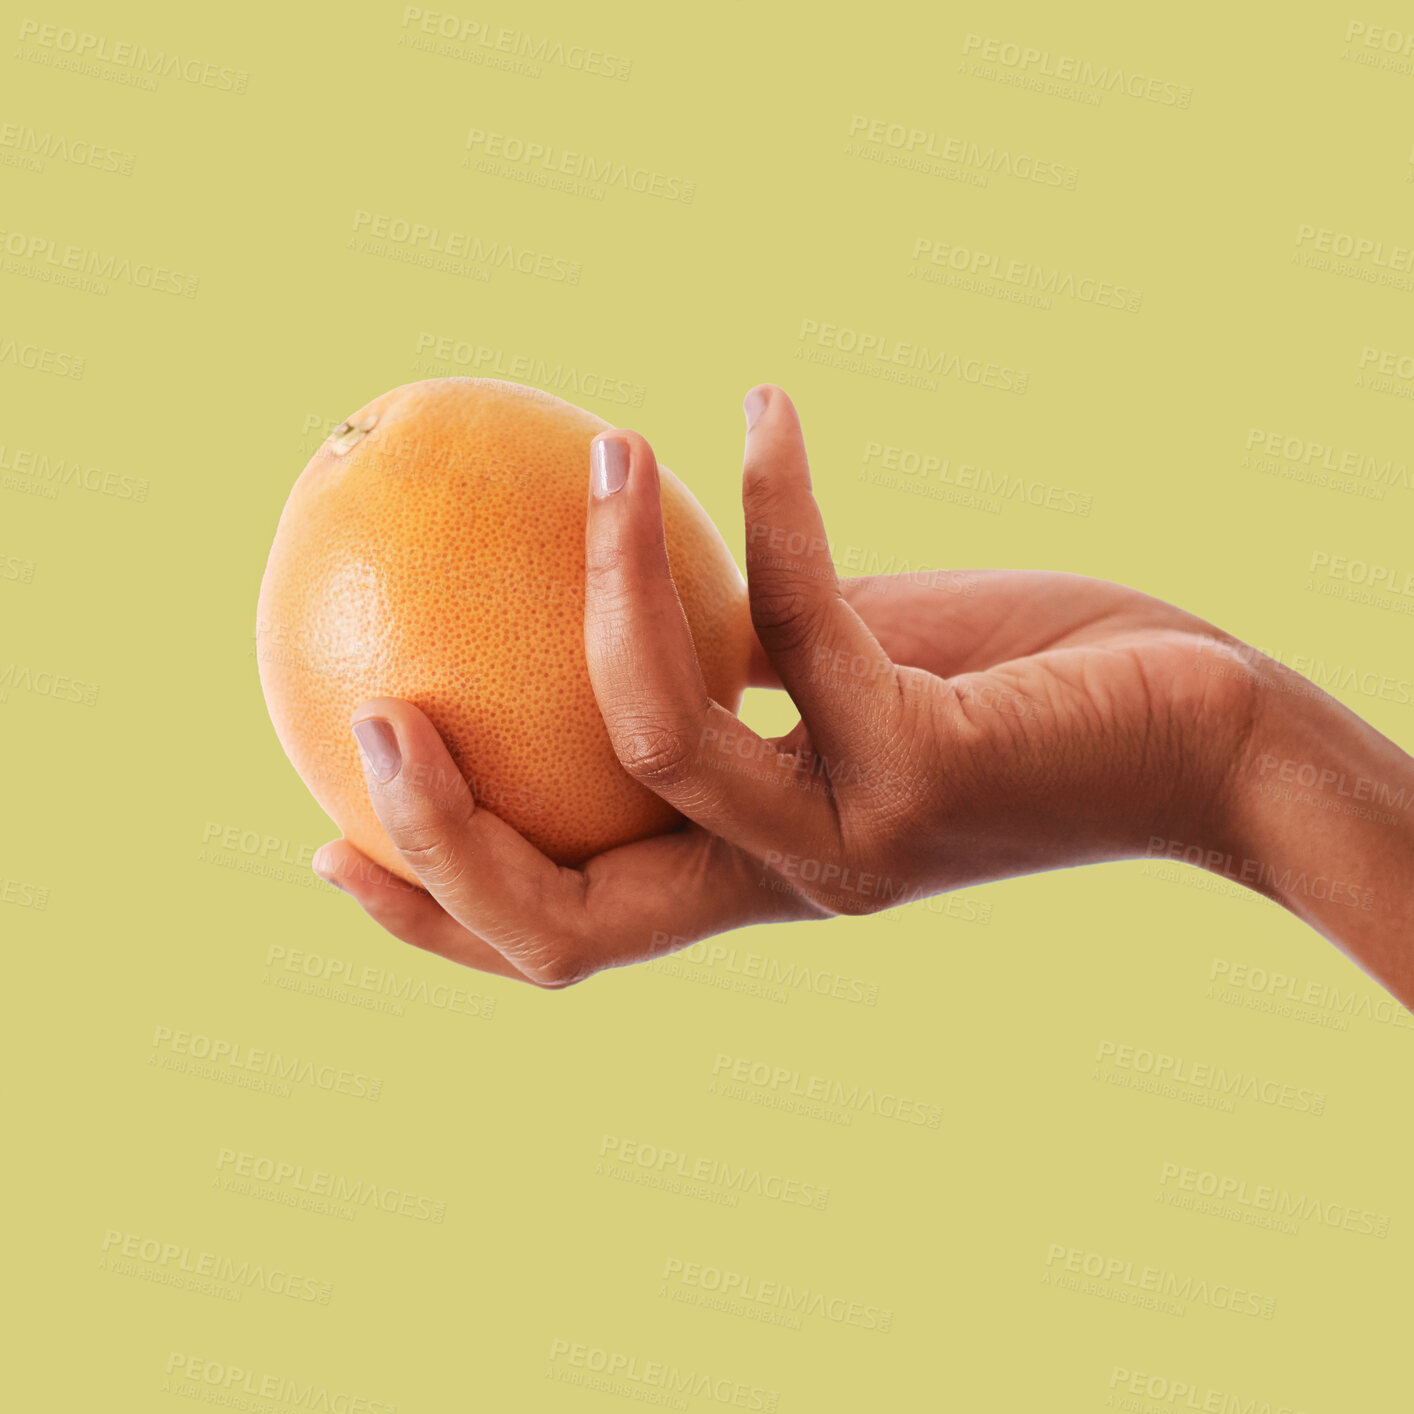 Buy stock photo Hands, orange and fruit for vitamin C, healthy diet plan or nutrition against a studio background. Hand holding fruity food, nectarine or grapefruit for health, organic wellness or citrus on mockup